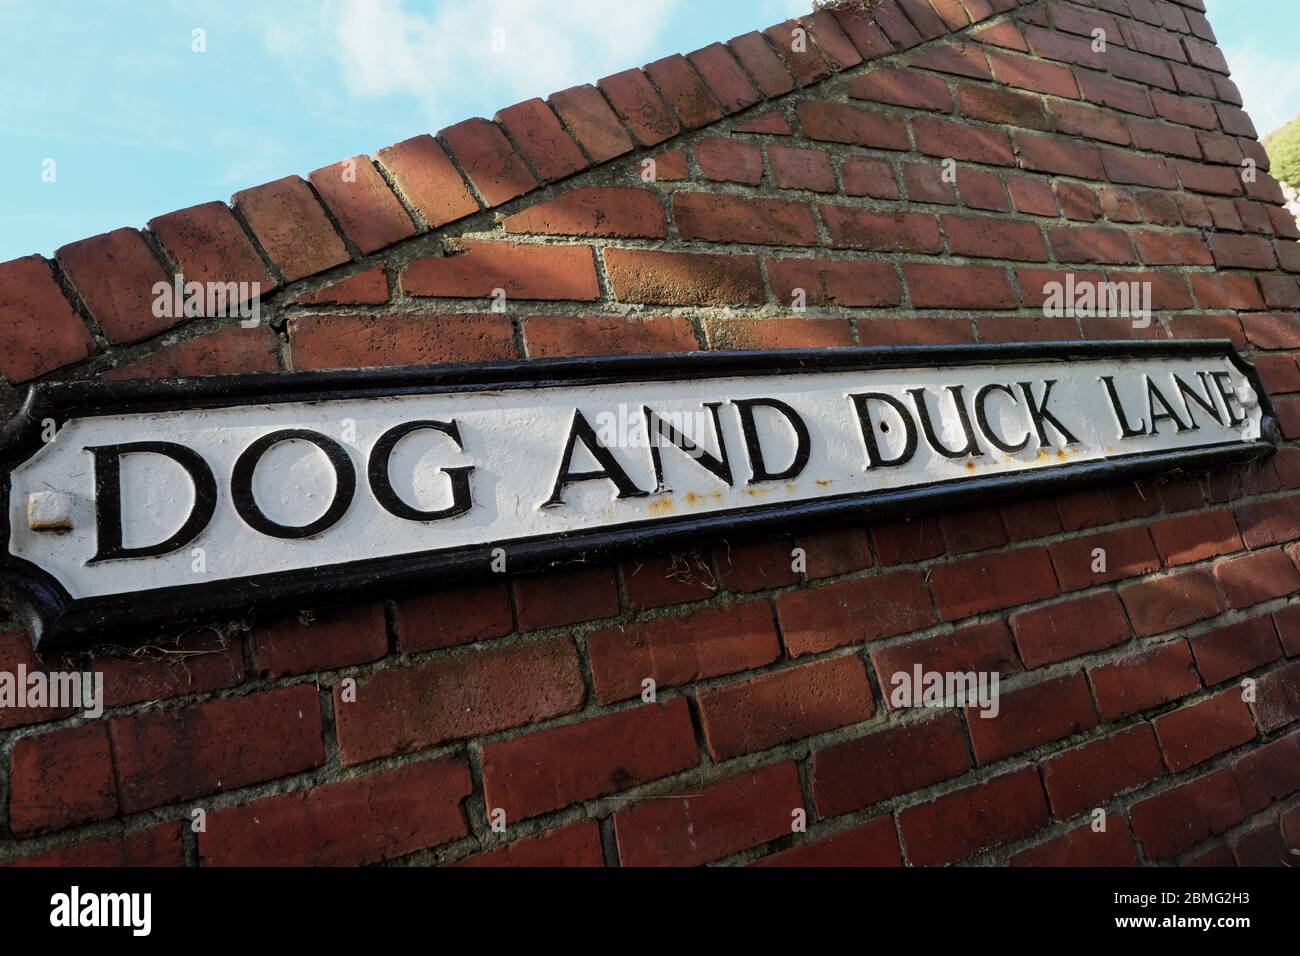 Dog and Duck Lane on Castle Road, Scarborough Yorkshire UK Stock Photo